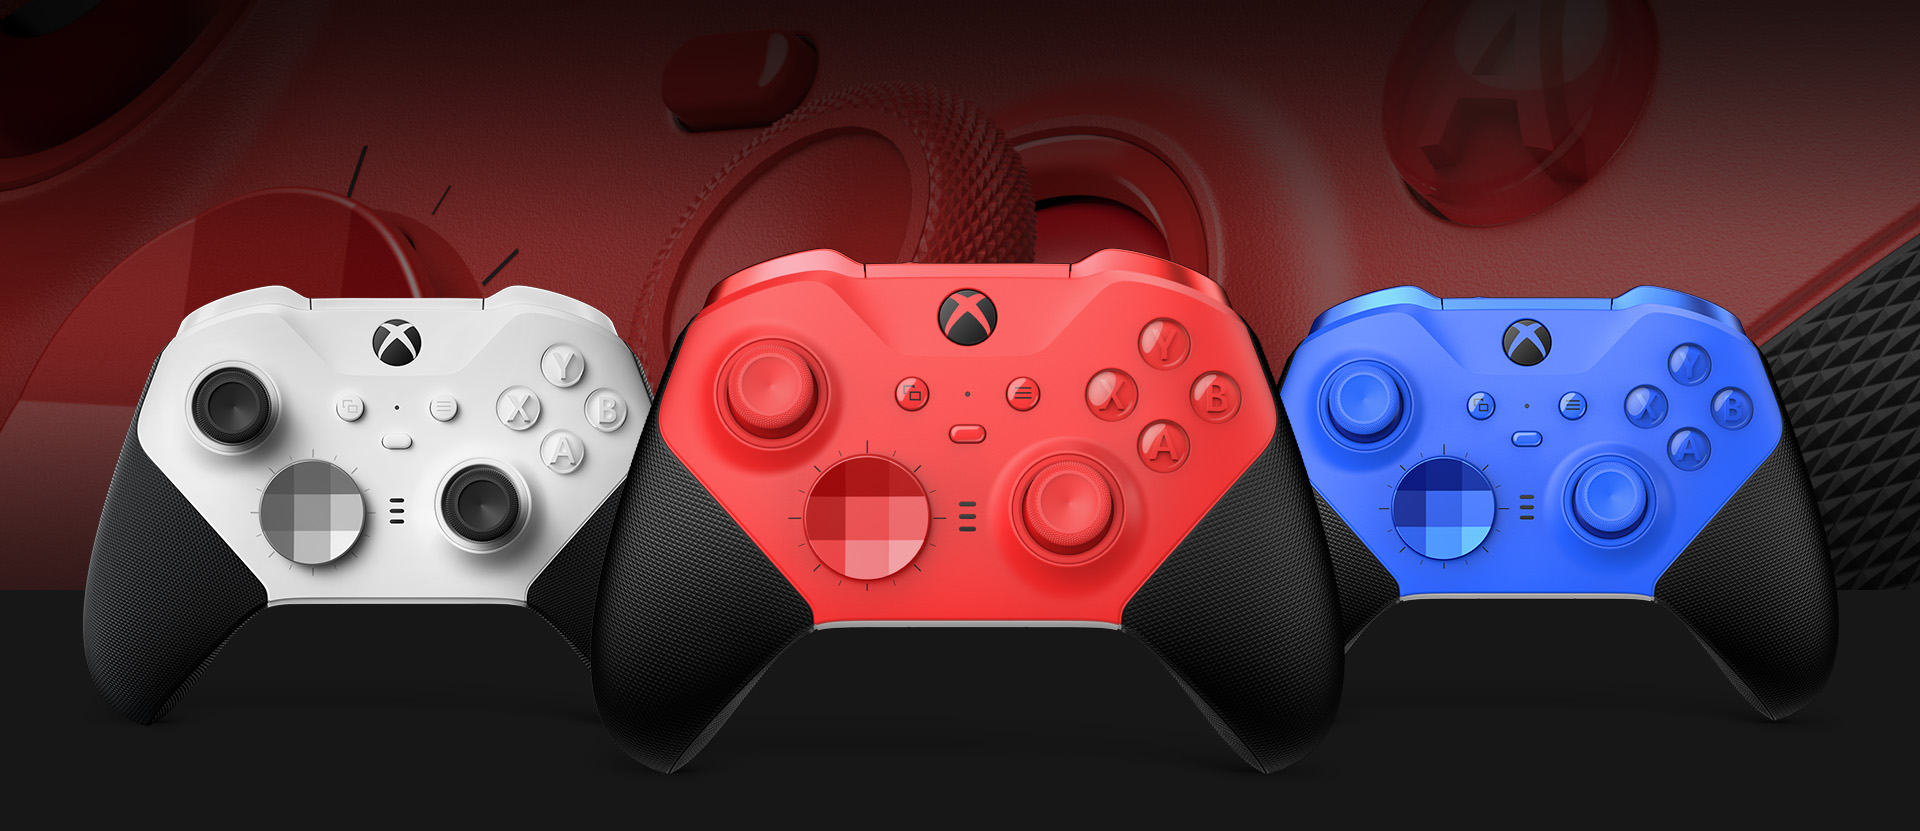 Front view of the Xbox Elite Wireless Controller Series 2 – Core (Red) with other colour options shown alongside. A close-up of the controller thumbsticks and textured grip is in the background.